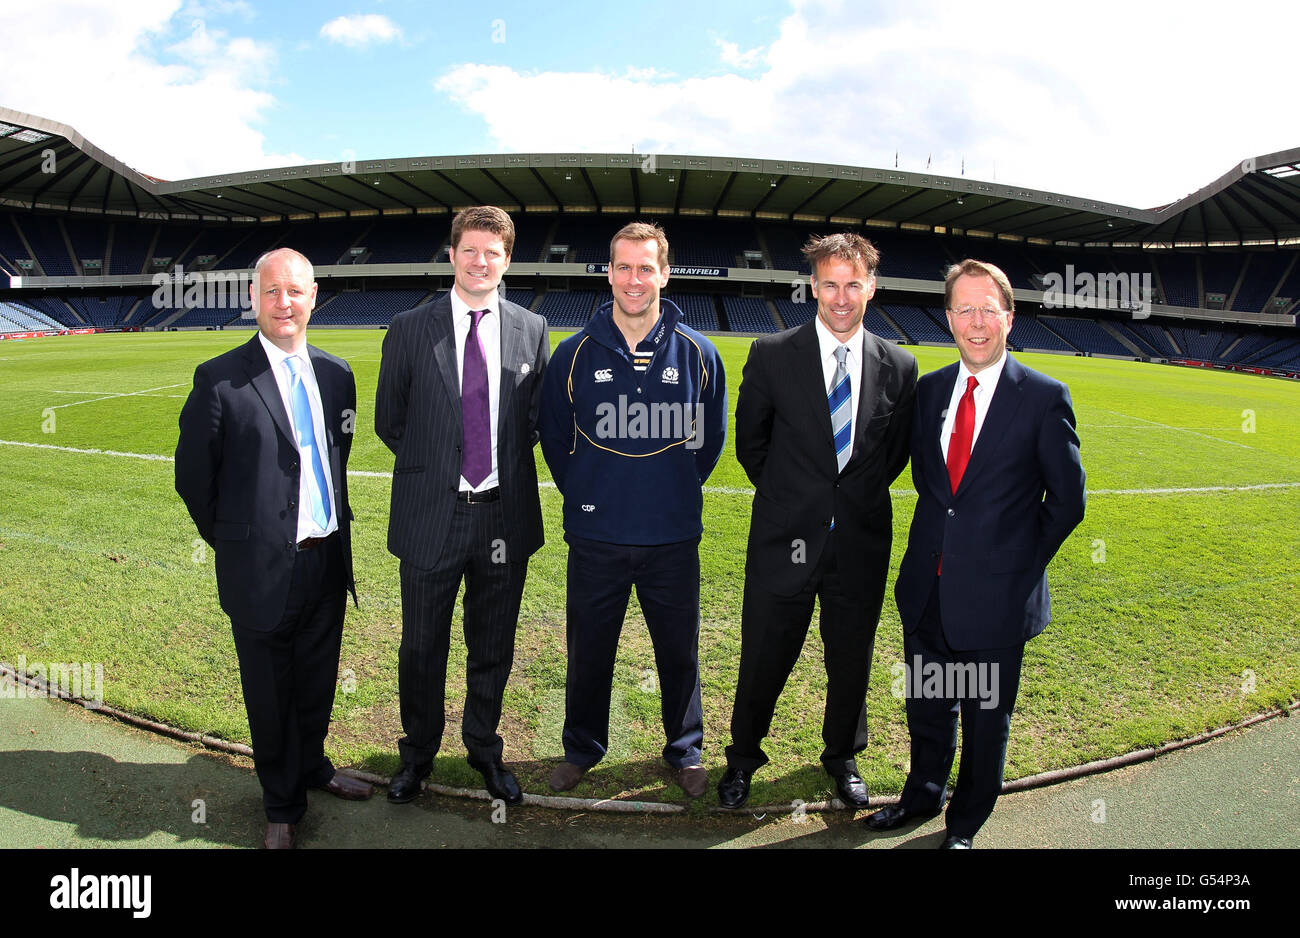 Chris Paterson (centre) with Stephen Gemmell, Dominic McKay, Graham Lowe and Kenneth Ferguson with during a photocall to announce his new job as ambassador and coach with Scottish Rugby during the Press Conference at Murrayfield, Edinburgh. Stock Photo